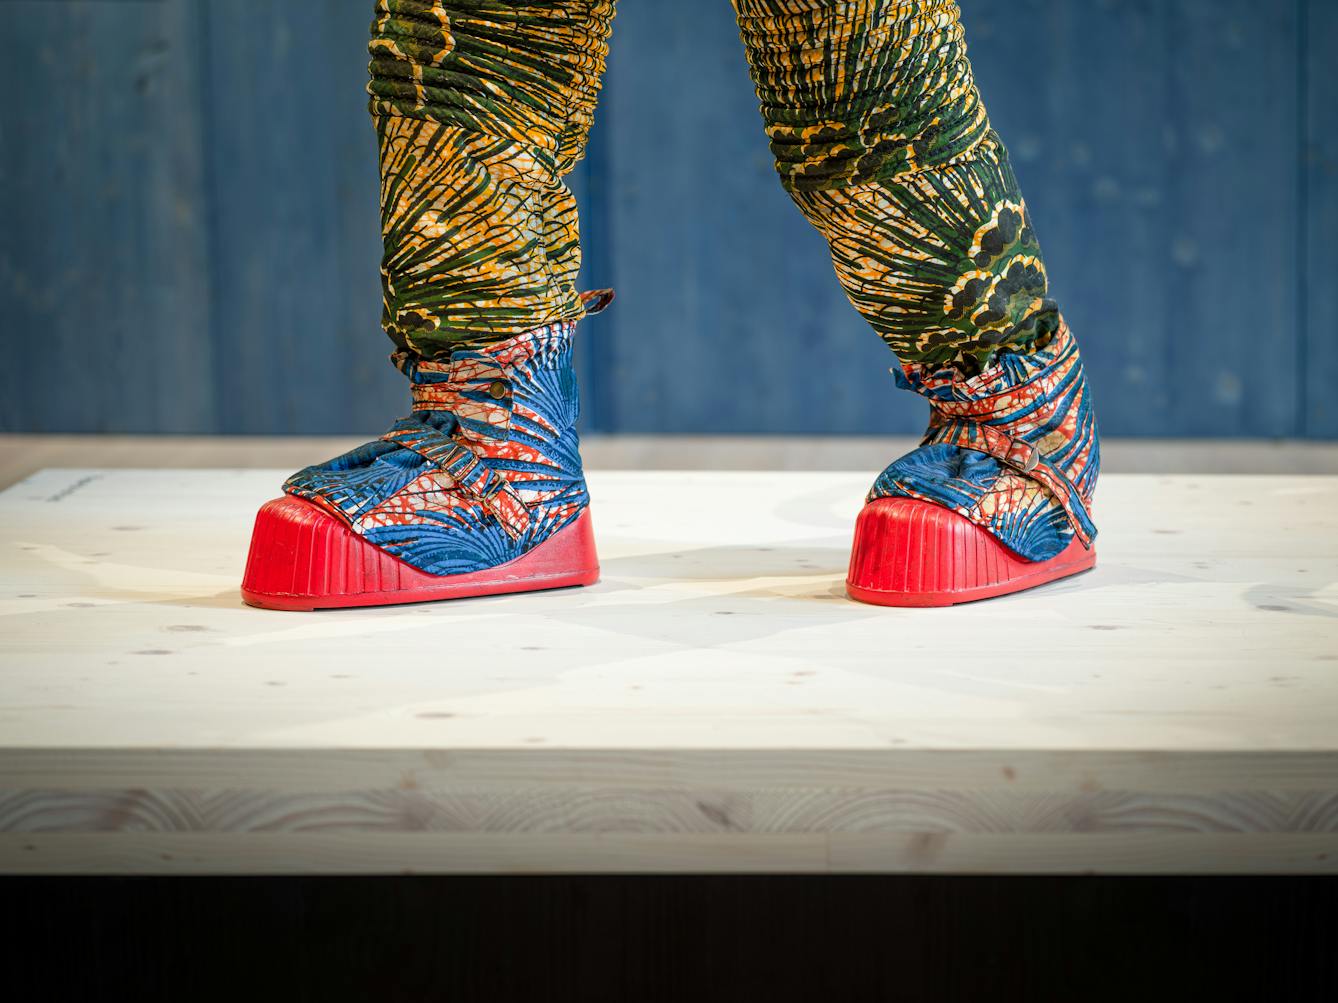 Photograph of an exhibition gallery space, with a blue stained wood wall in the background. In the foreground are the feet of a life-size artwork of a figure resembling an astronaut. The astronaut's boots are bright red in colour and their trousers are patterned in green and yellow.